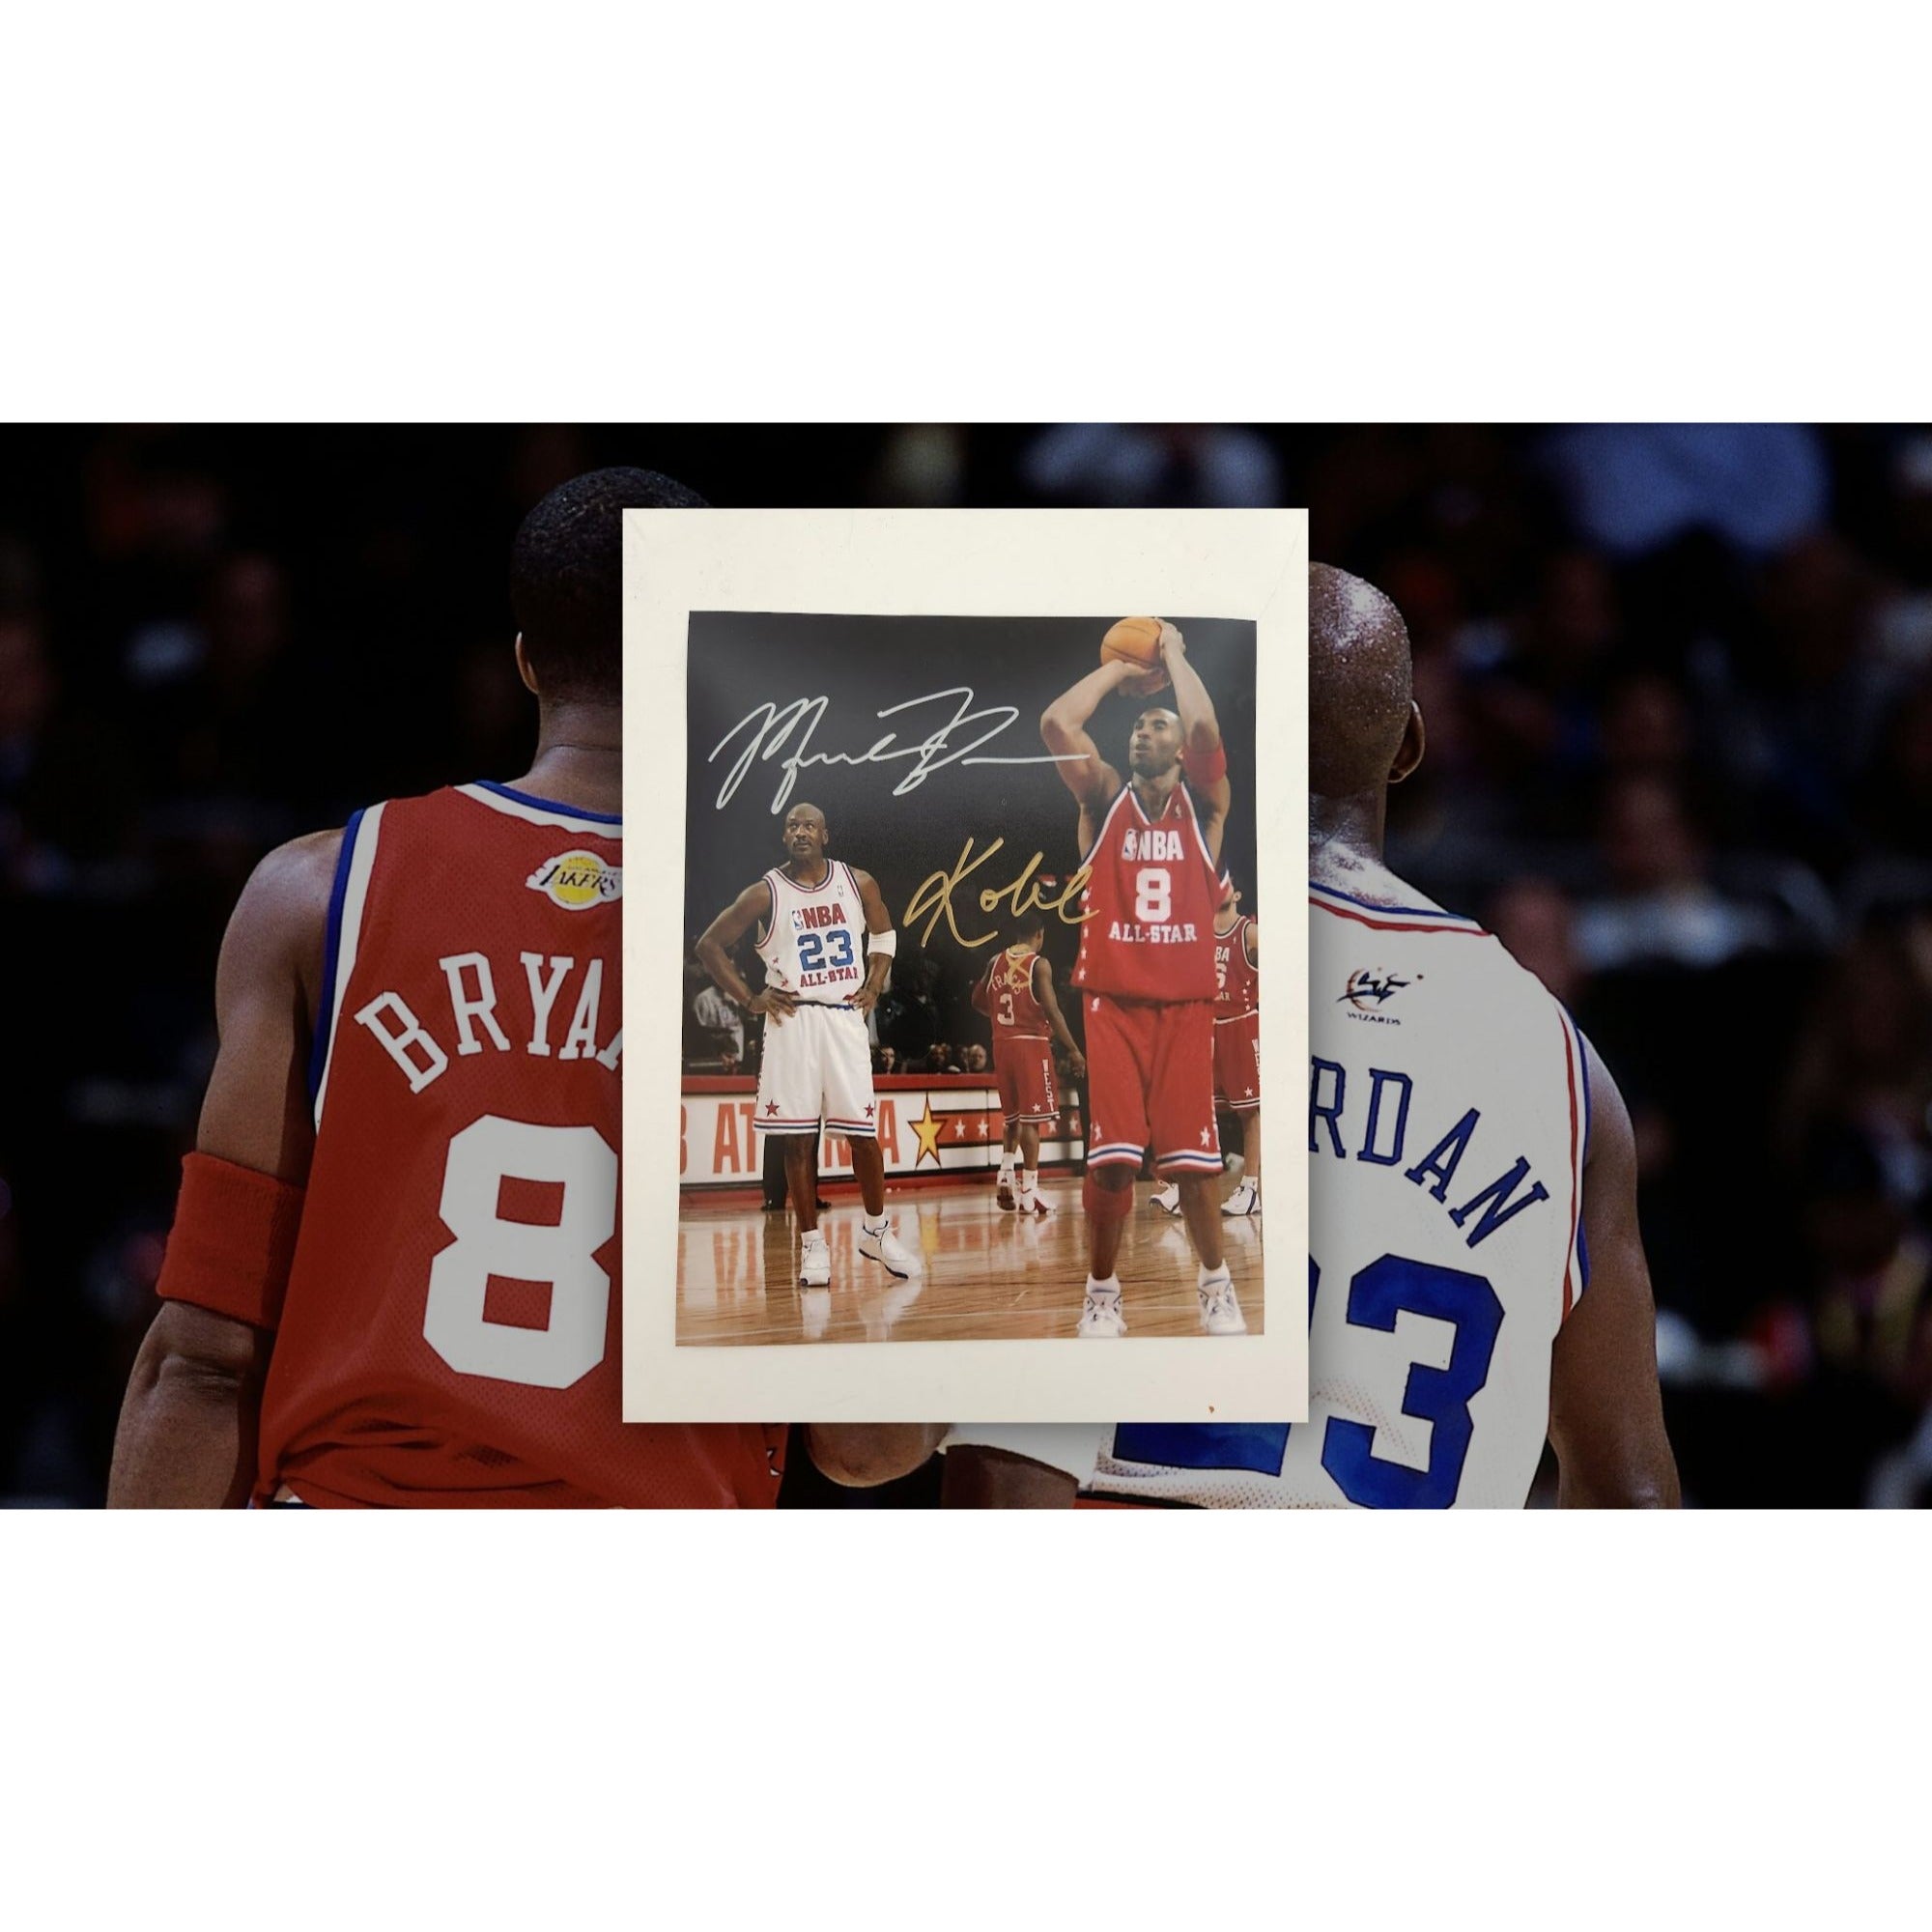 Michael Jordan and Kobe Bryant 8x10 photo signed with proof